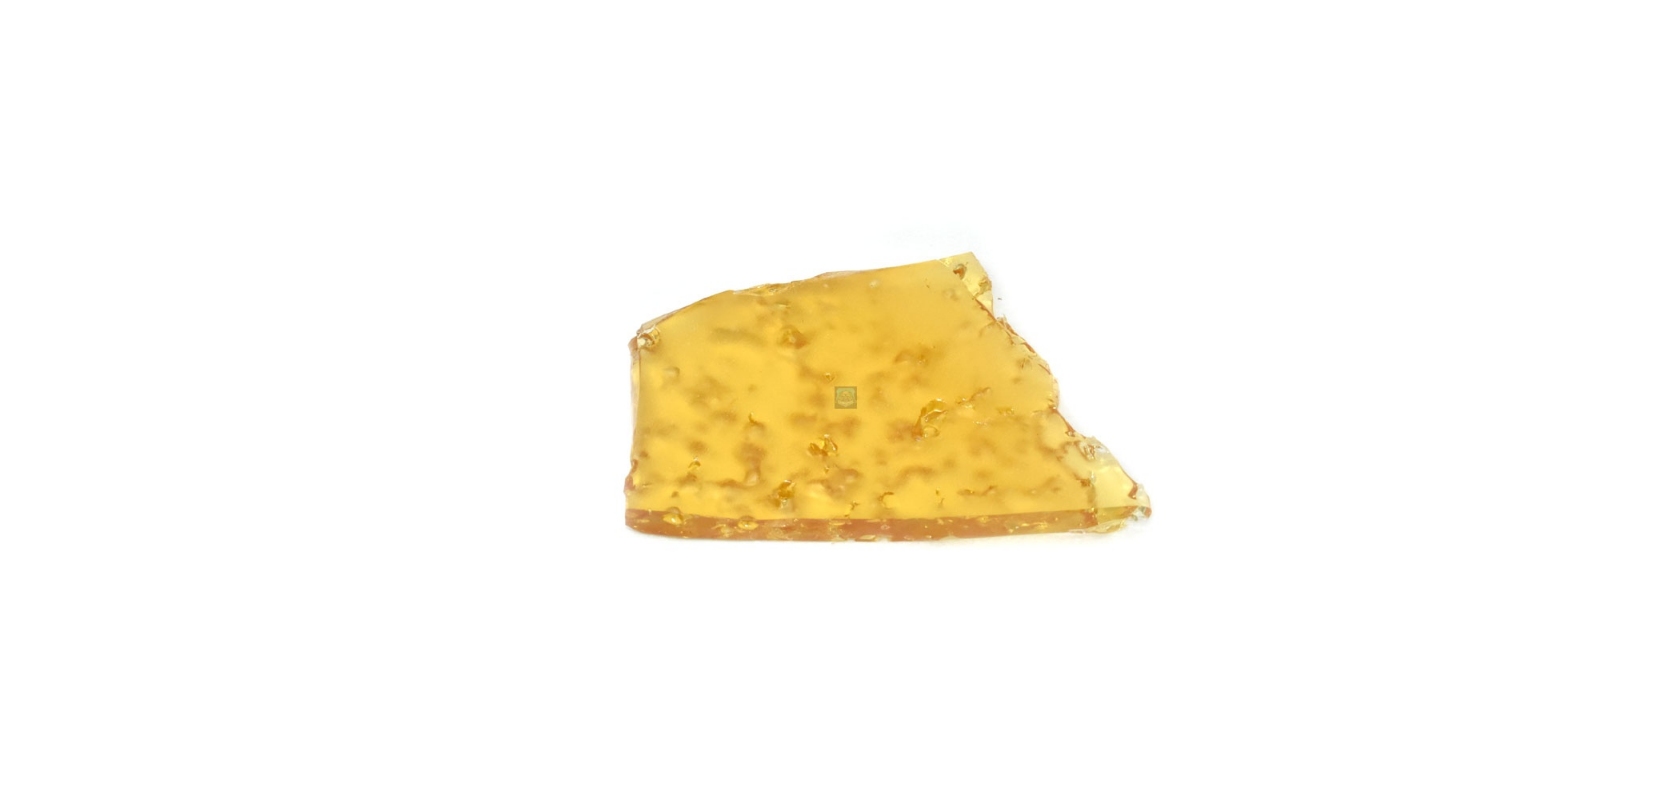 Buy your chosen amount of Hawaiian Punch Shatter starting at less than 10 bucks and work your way up to 14 grams or more!